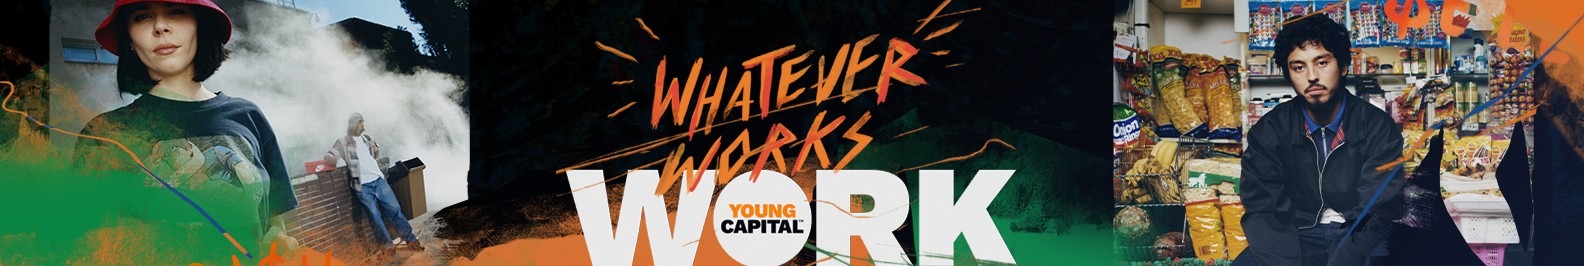 YoungCapital background